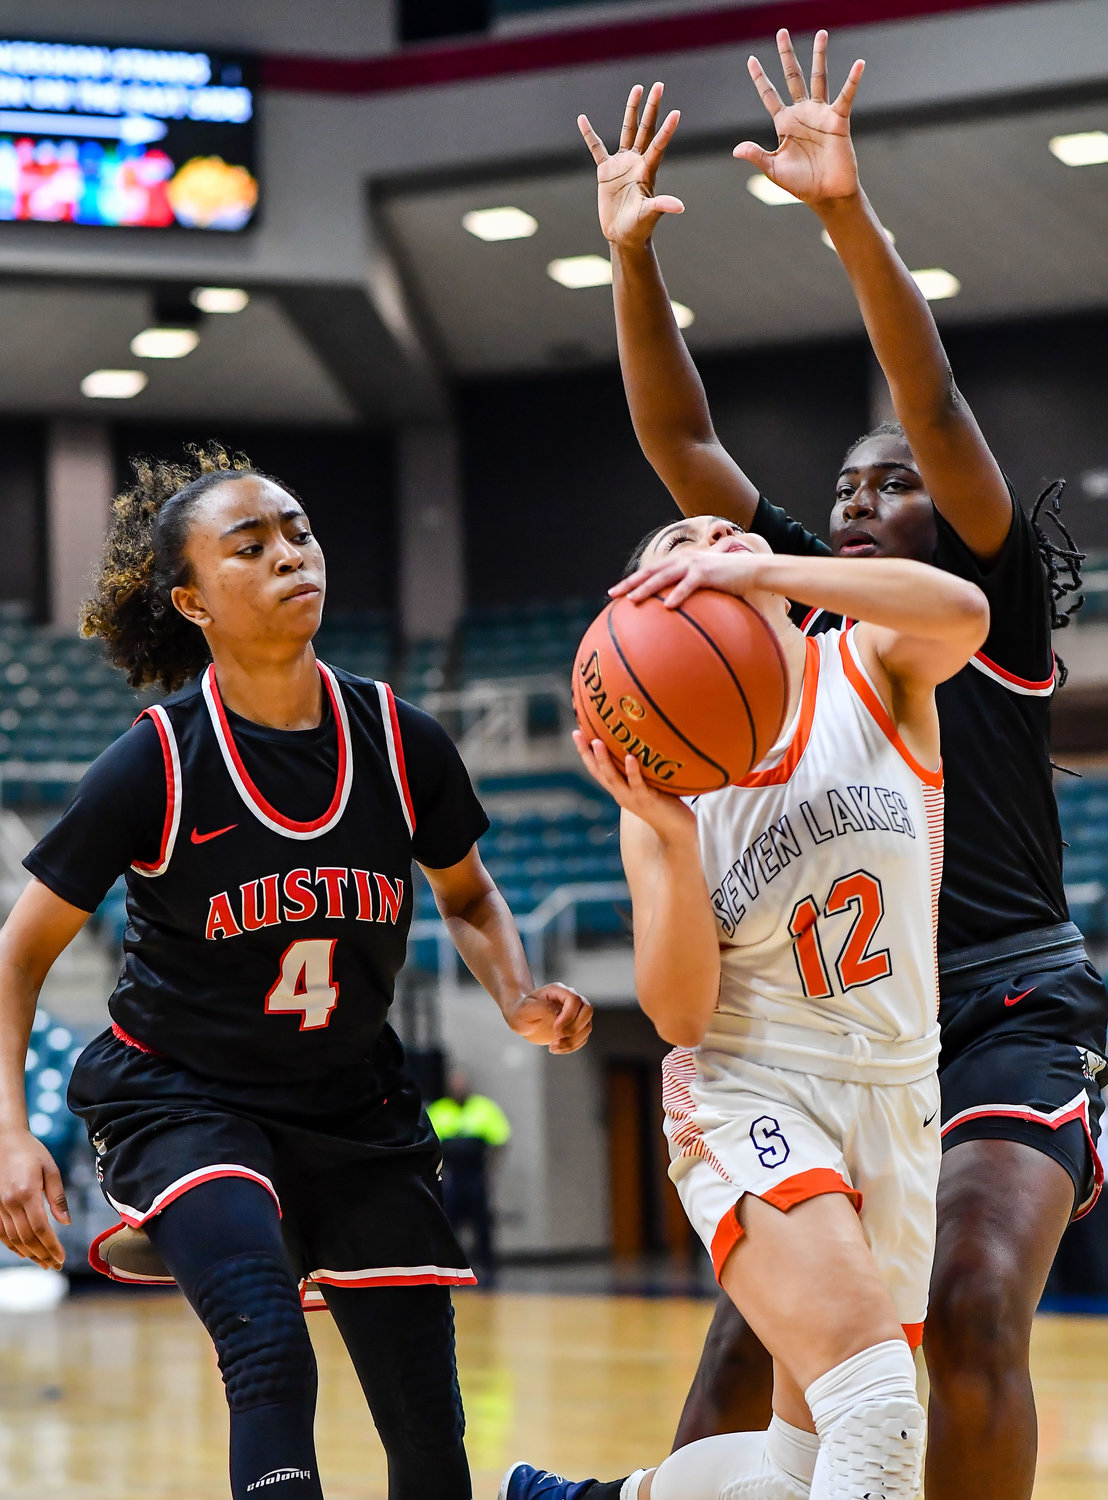 Katy Tx. Feb 22, 2022:  Seven Lakes Cailyn Tucker #12 drives to the basket during the Regional Quarterfinal playoff game, Seven Lakes vs Fort Bend Austin at the Merrell Center. (Photo by Mark Goodman / Katy Times)